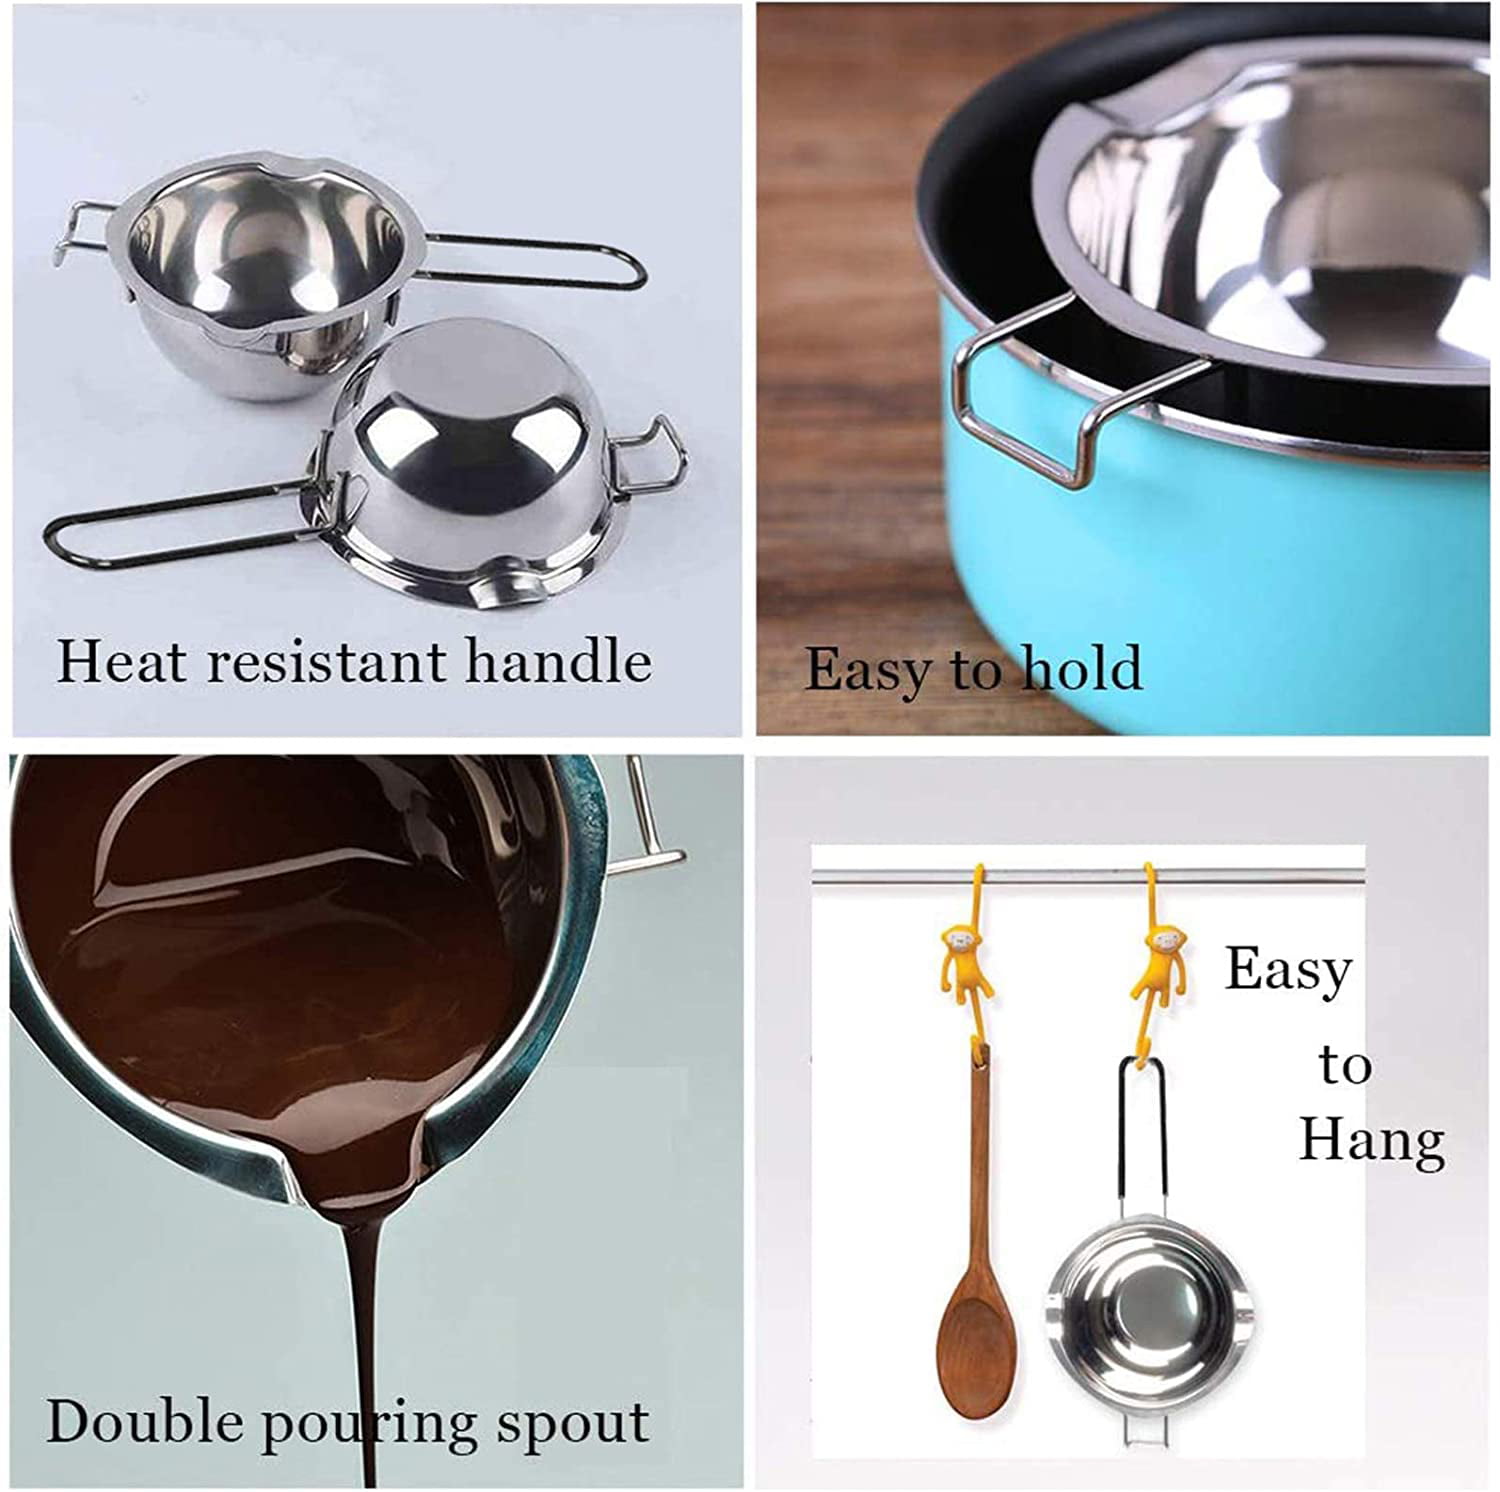 Melting Pot Butter Stainless Steel Wax Melter Candle Making Pot for Chocolate 600ML/20oz Melting Chocolate and Candy Making Double Boiler Pot Candle Pouring Pot with Heat Resistant Handle 